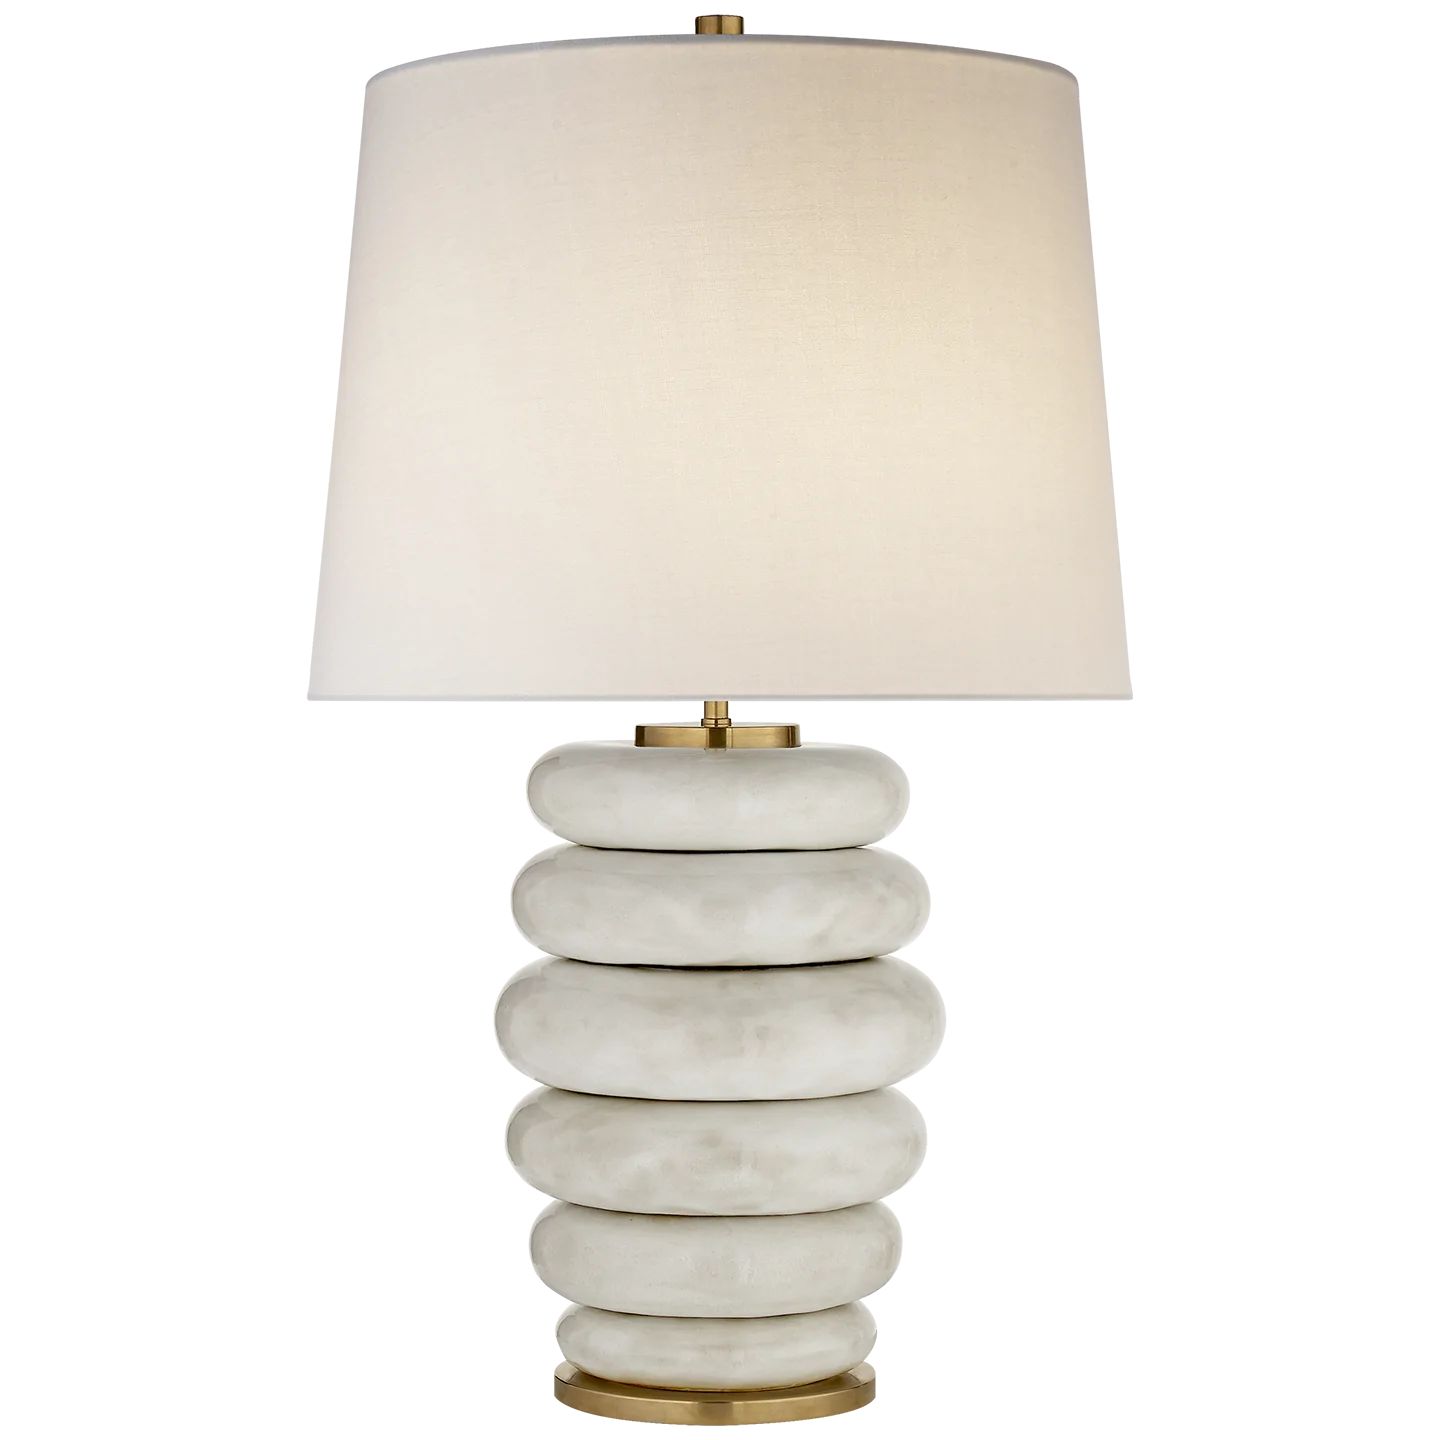 Phoebe Stacked Table Lamp in Antiqued White with Linen Shade | Burke Decor